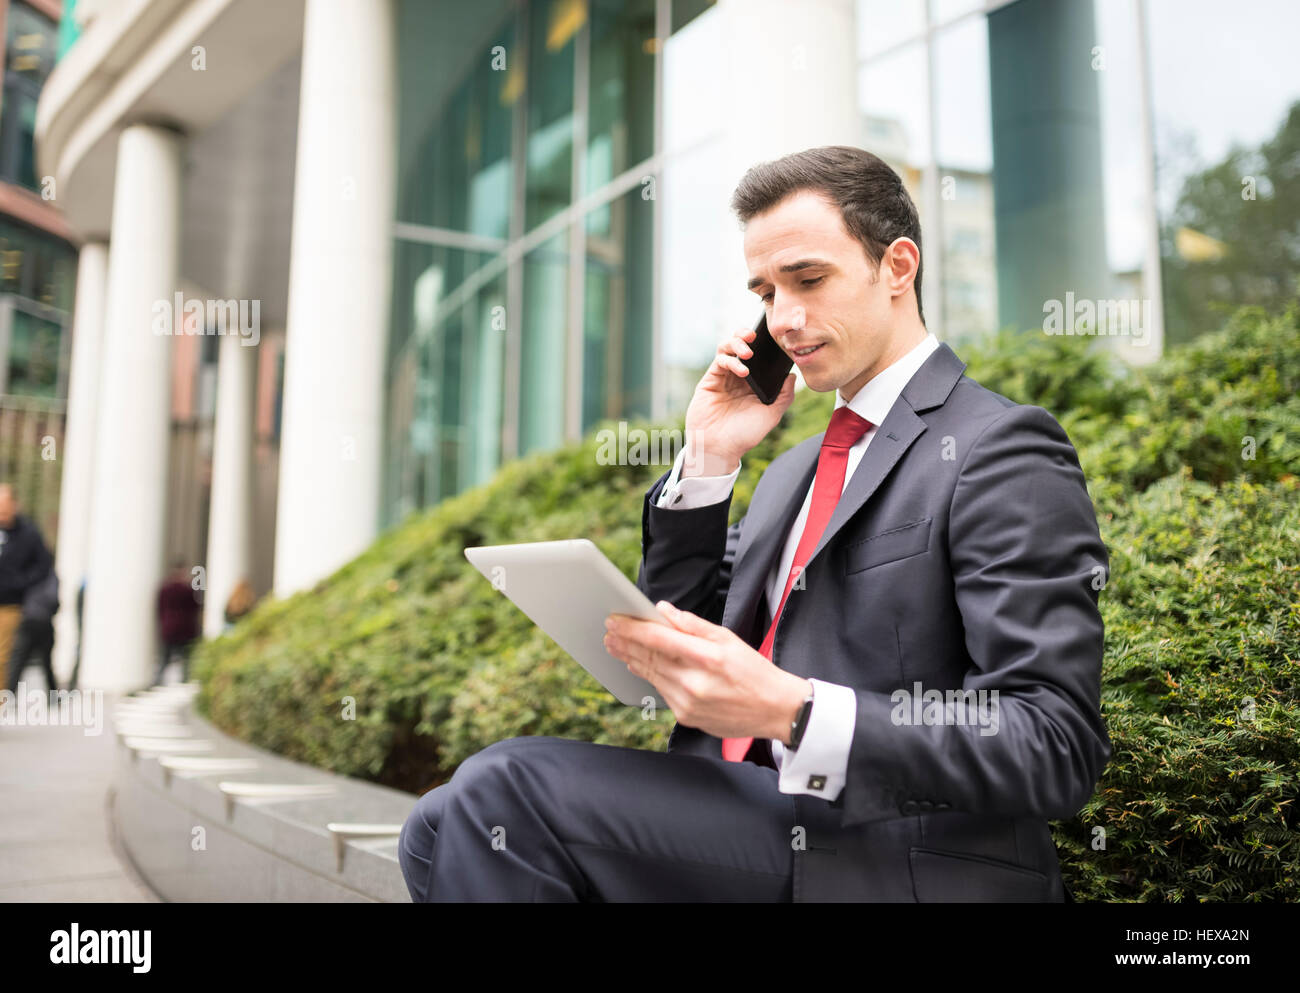 Businessman in city making telephone call, using digital tablet Stock Photo